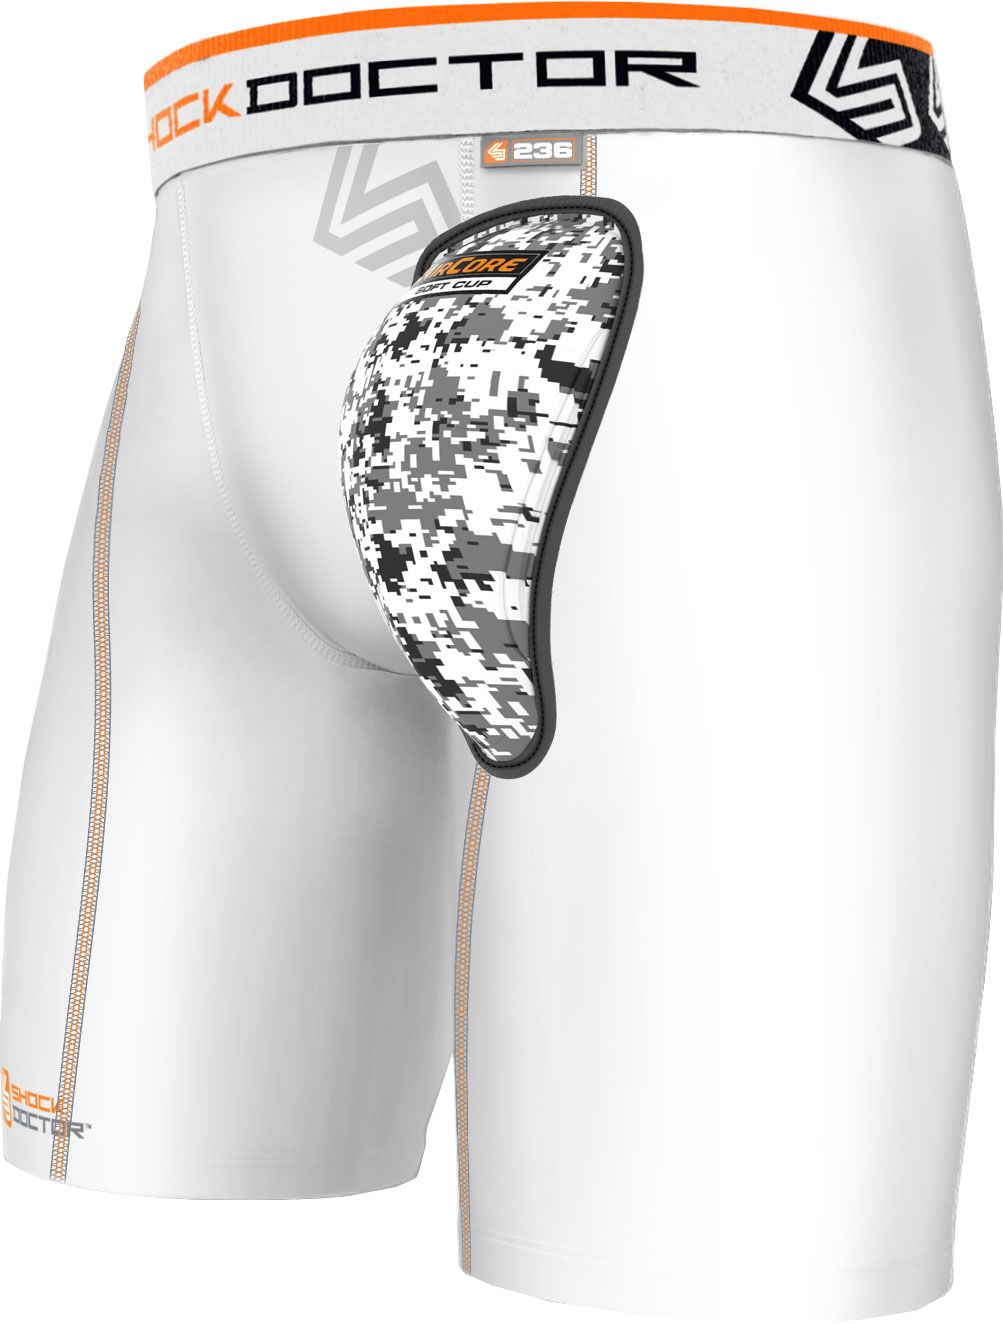 nike compression shorts with cup pocket